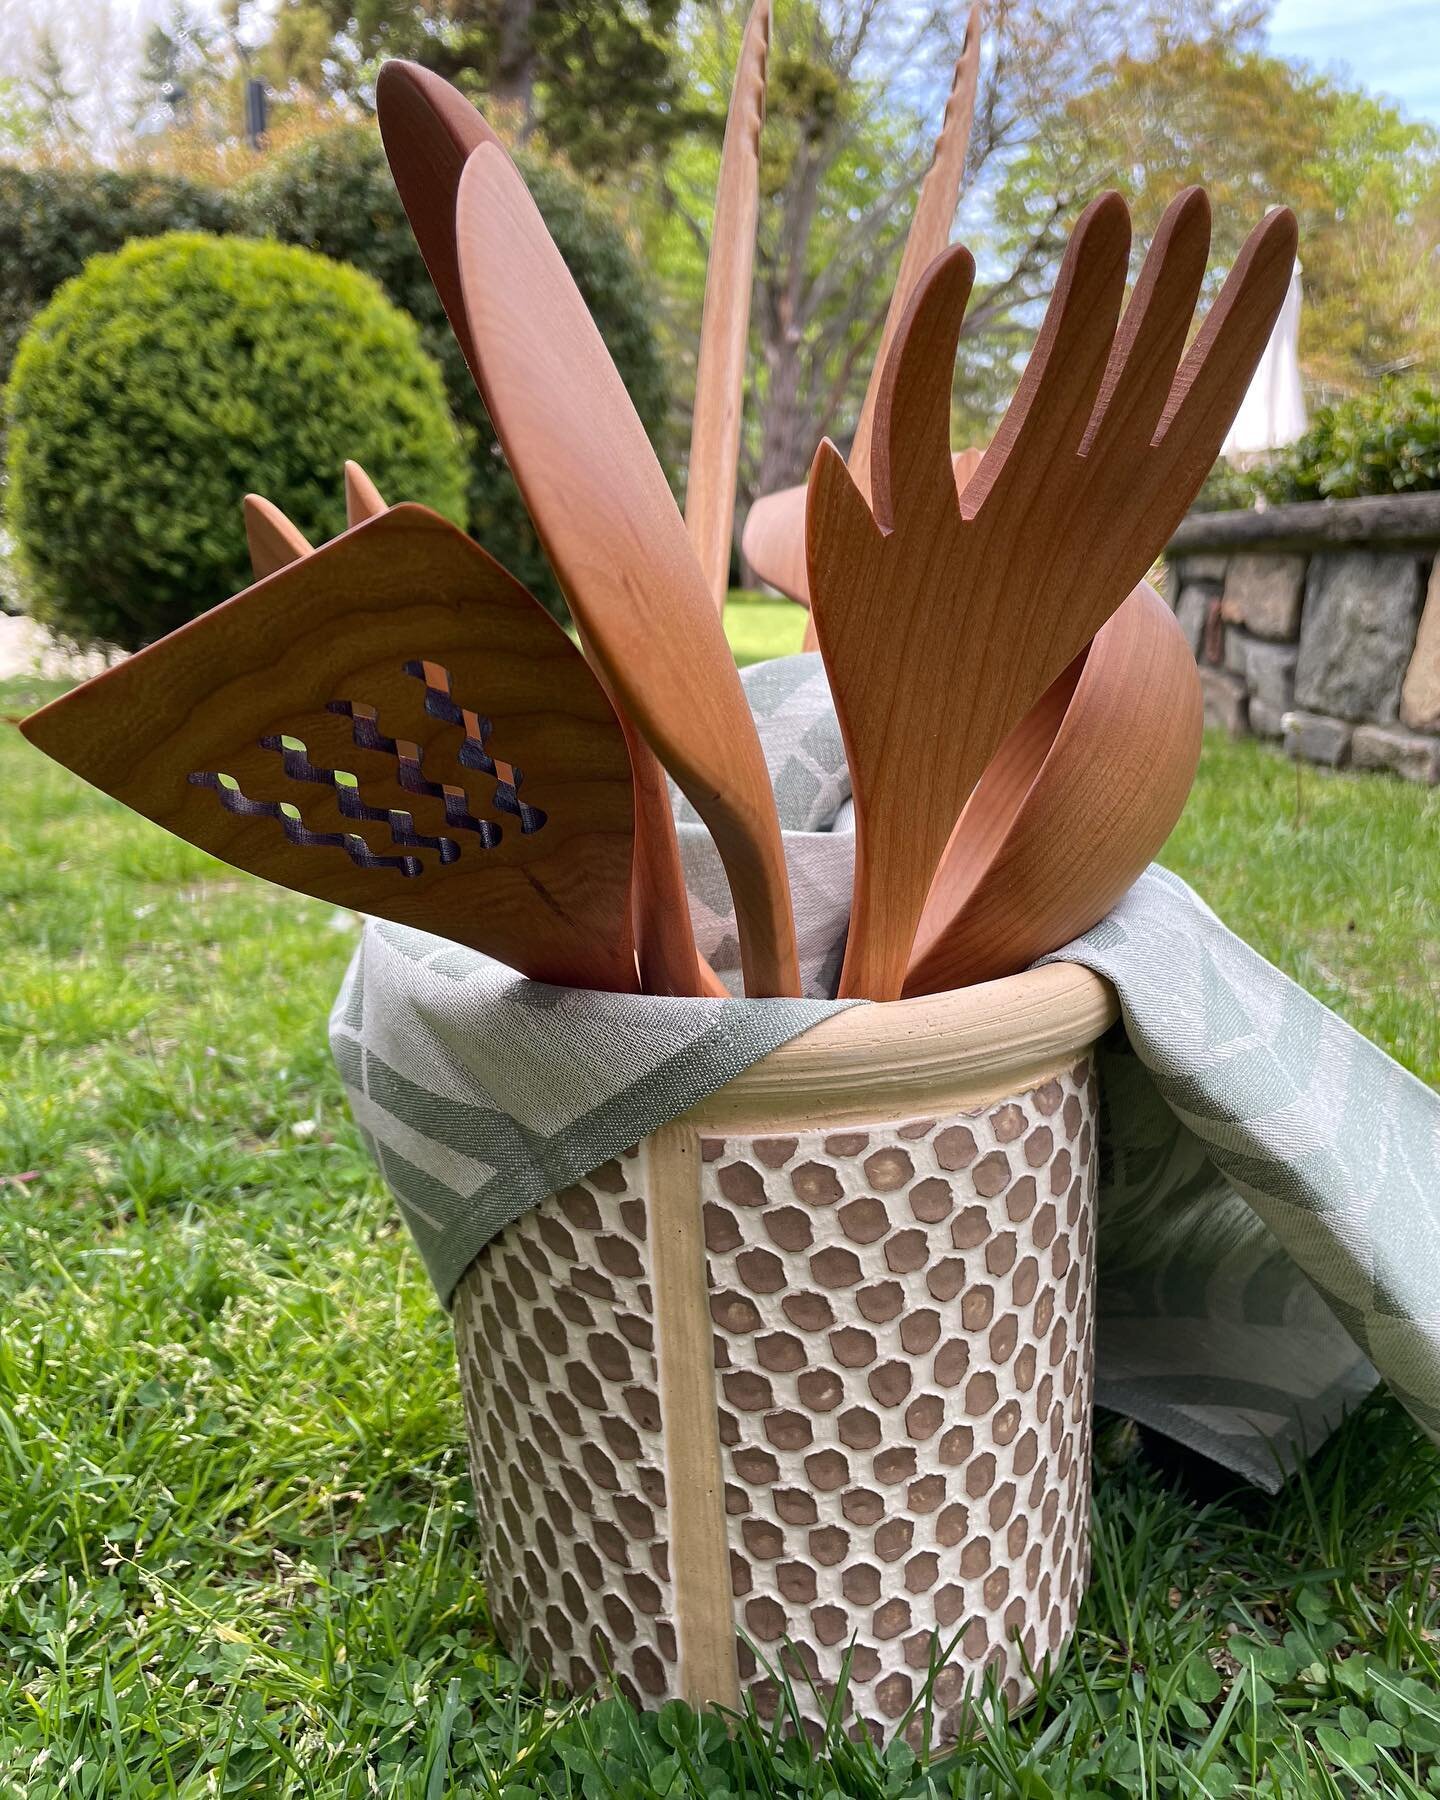 Nothing is more natural than Wild Cherry utensils.  Not only are they stunning, wooden utensils are safe for your cookware and the earth 🌏 
.
.
.
#cherry #wood #kitchenutensils #cooktogether #springtime #woodenutensils #simple #terrafirma #nature #l